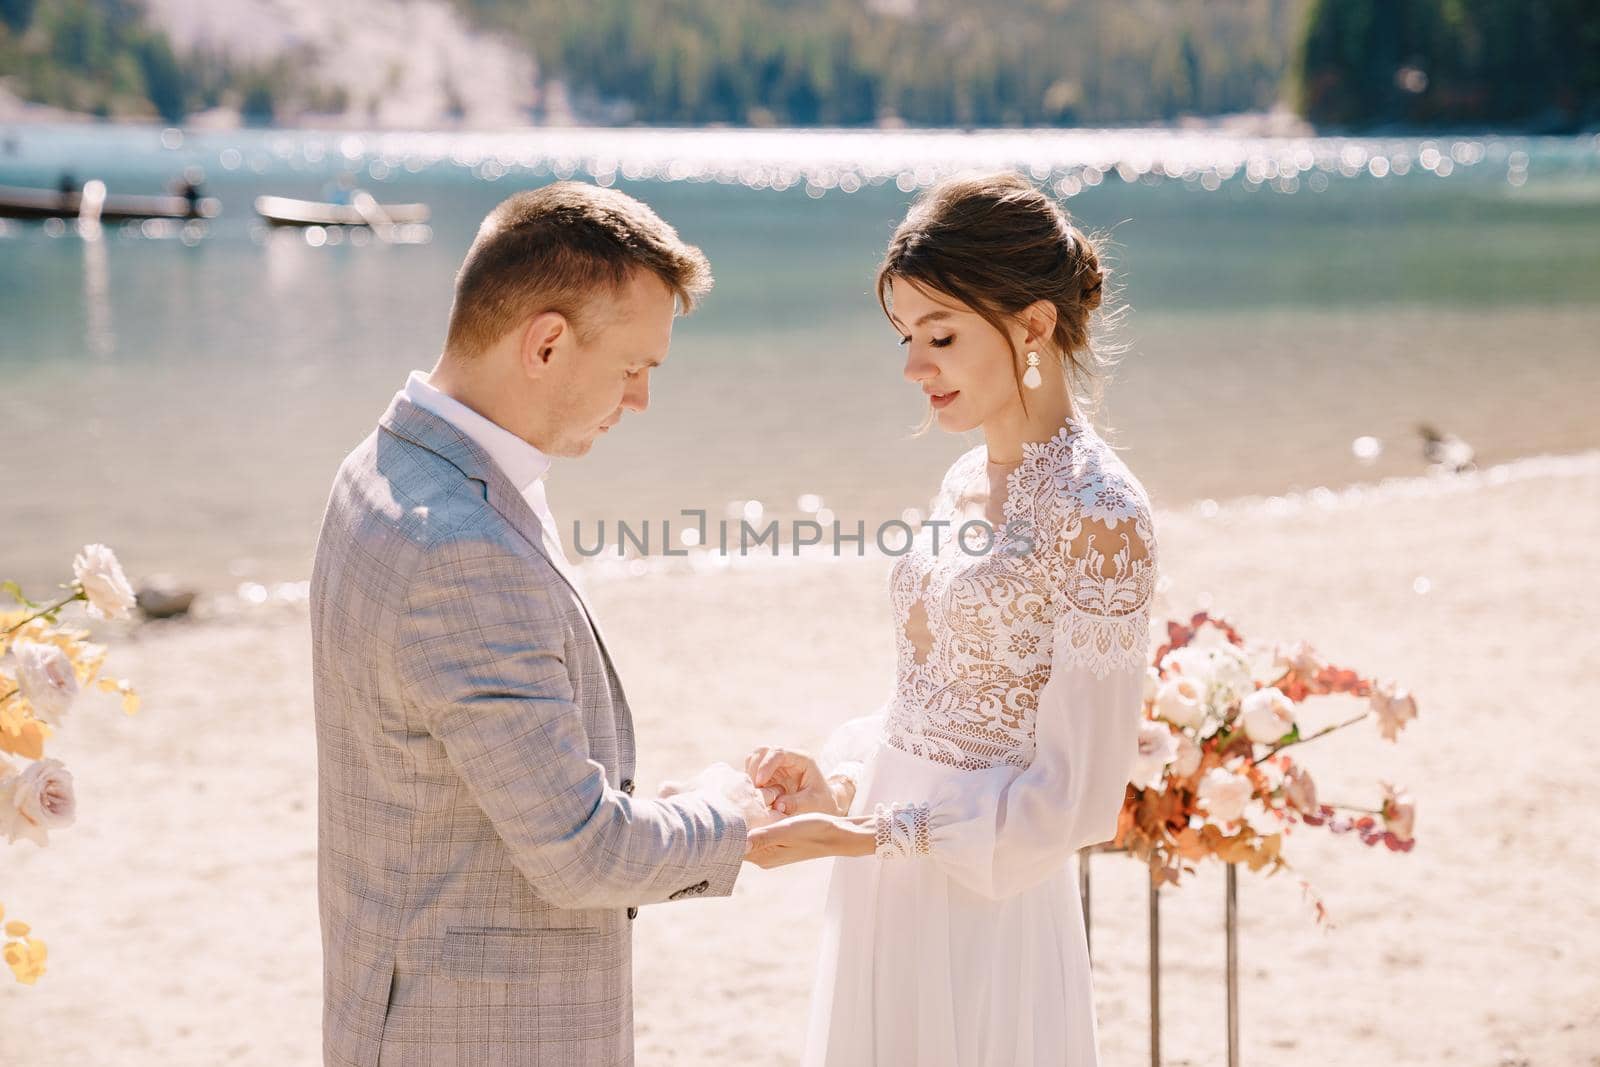 The bride dons a ring to the groom at the venue for the ceremony, with an arch of autumn floral columns, against the backdrop of Lago di Braies in Italy. Destination wedding in Europe, at Braies lake.